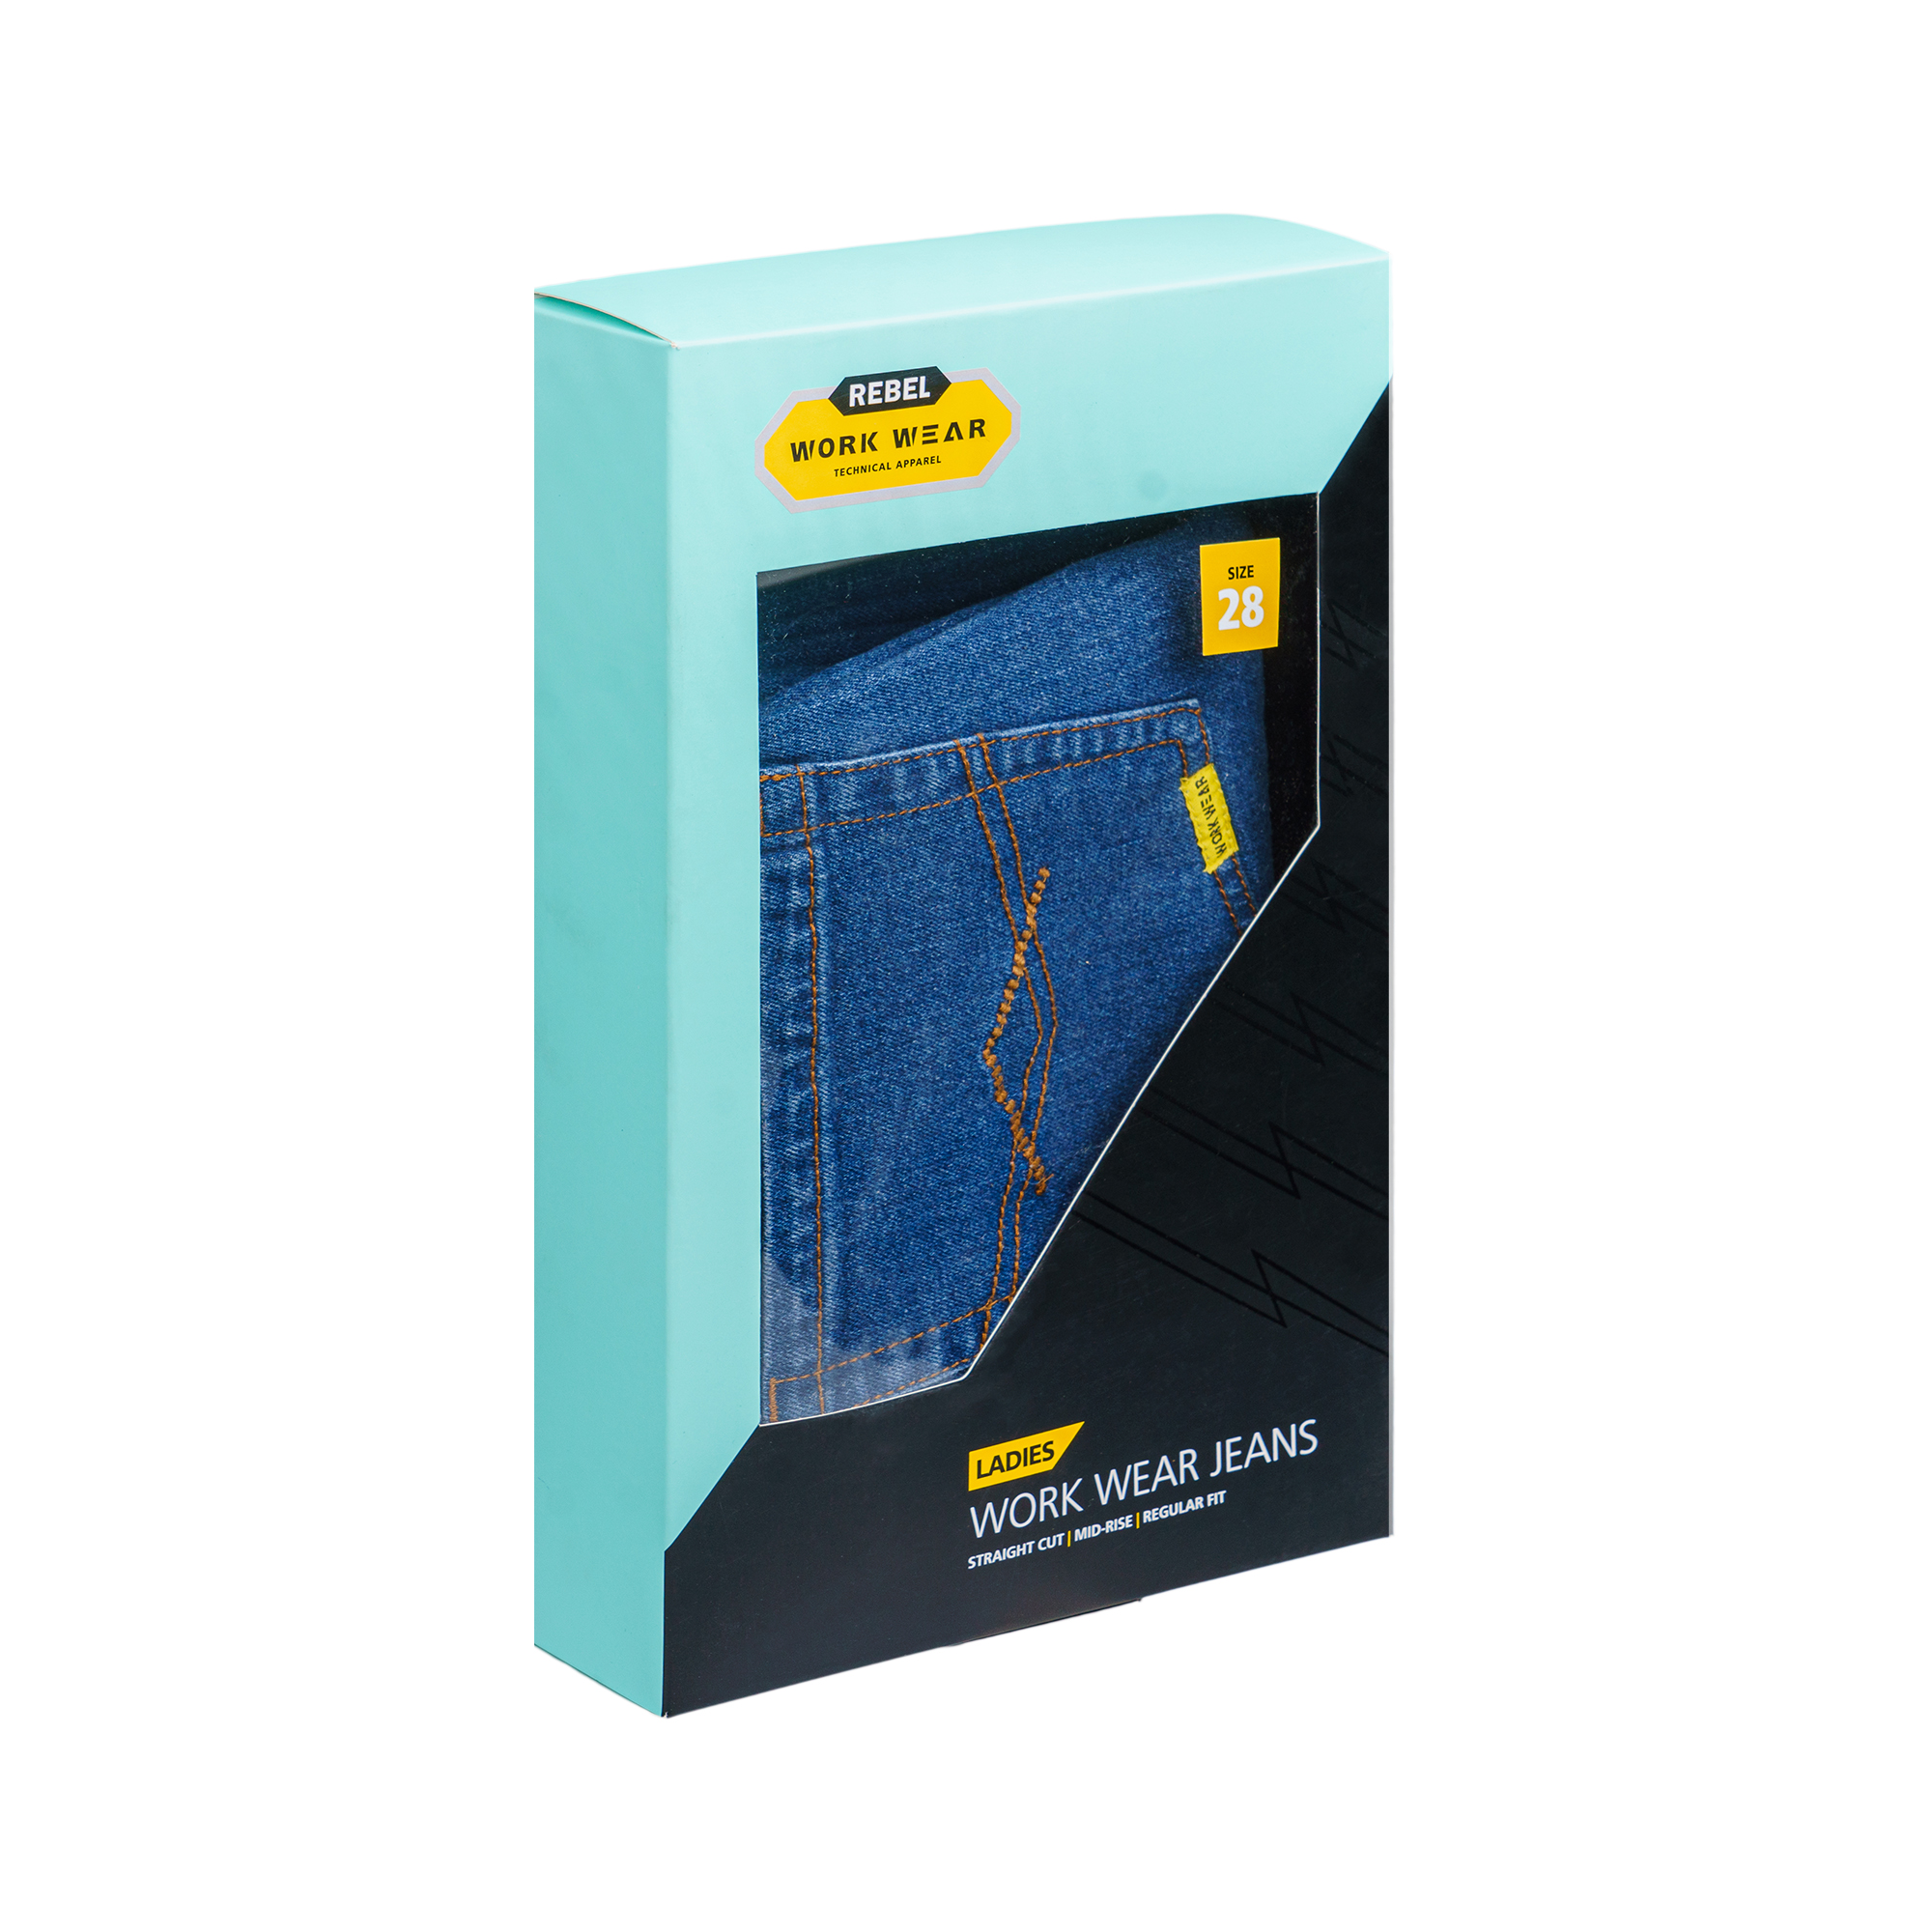 Workwear_Jeans_Box_Womens_Right